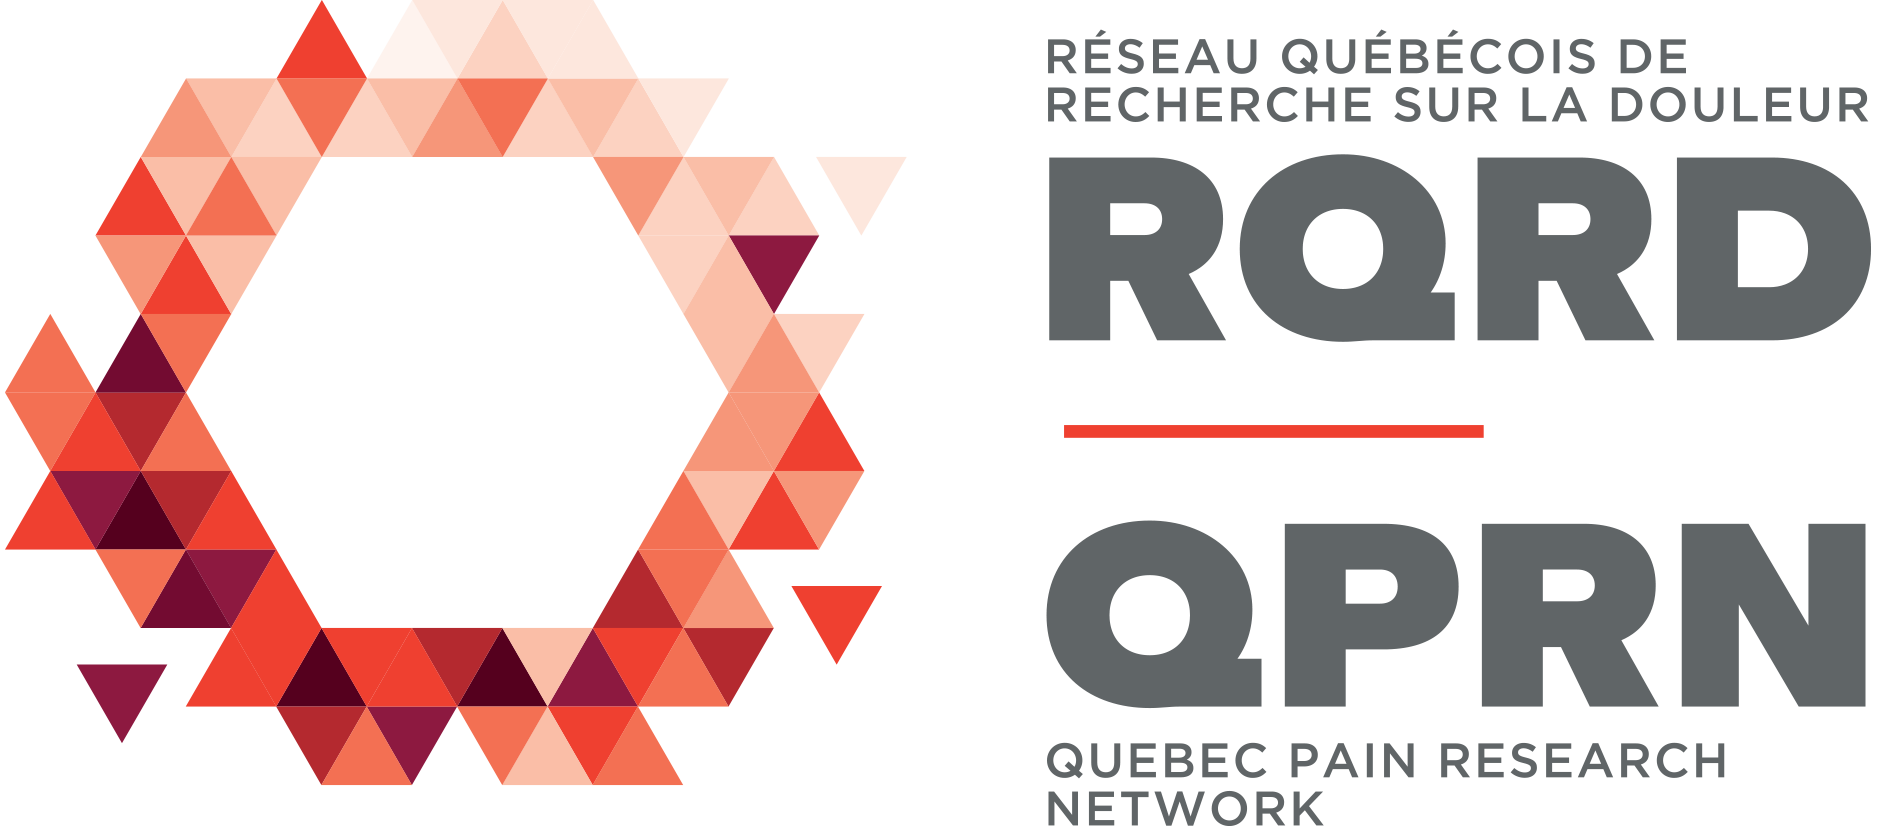 Quebec Pain Research Network